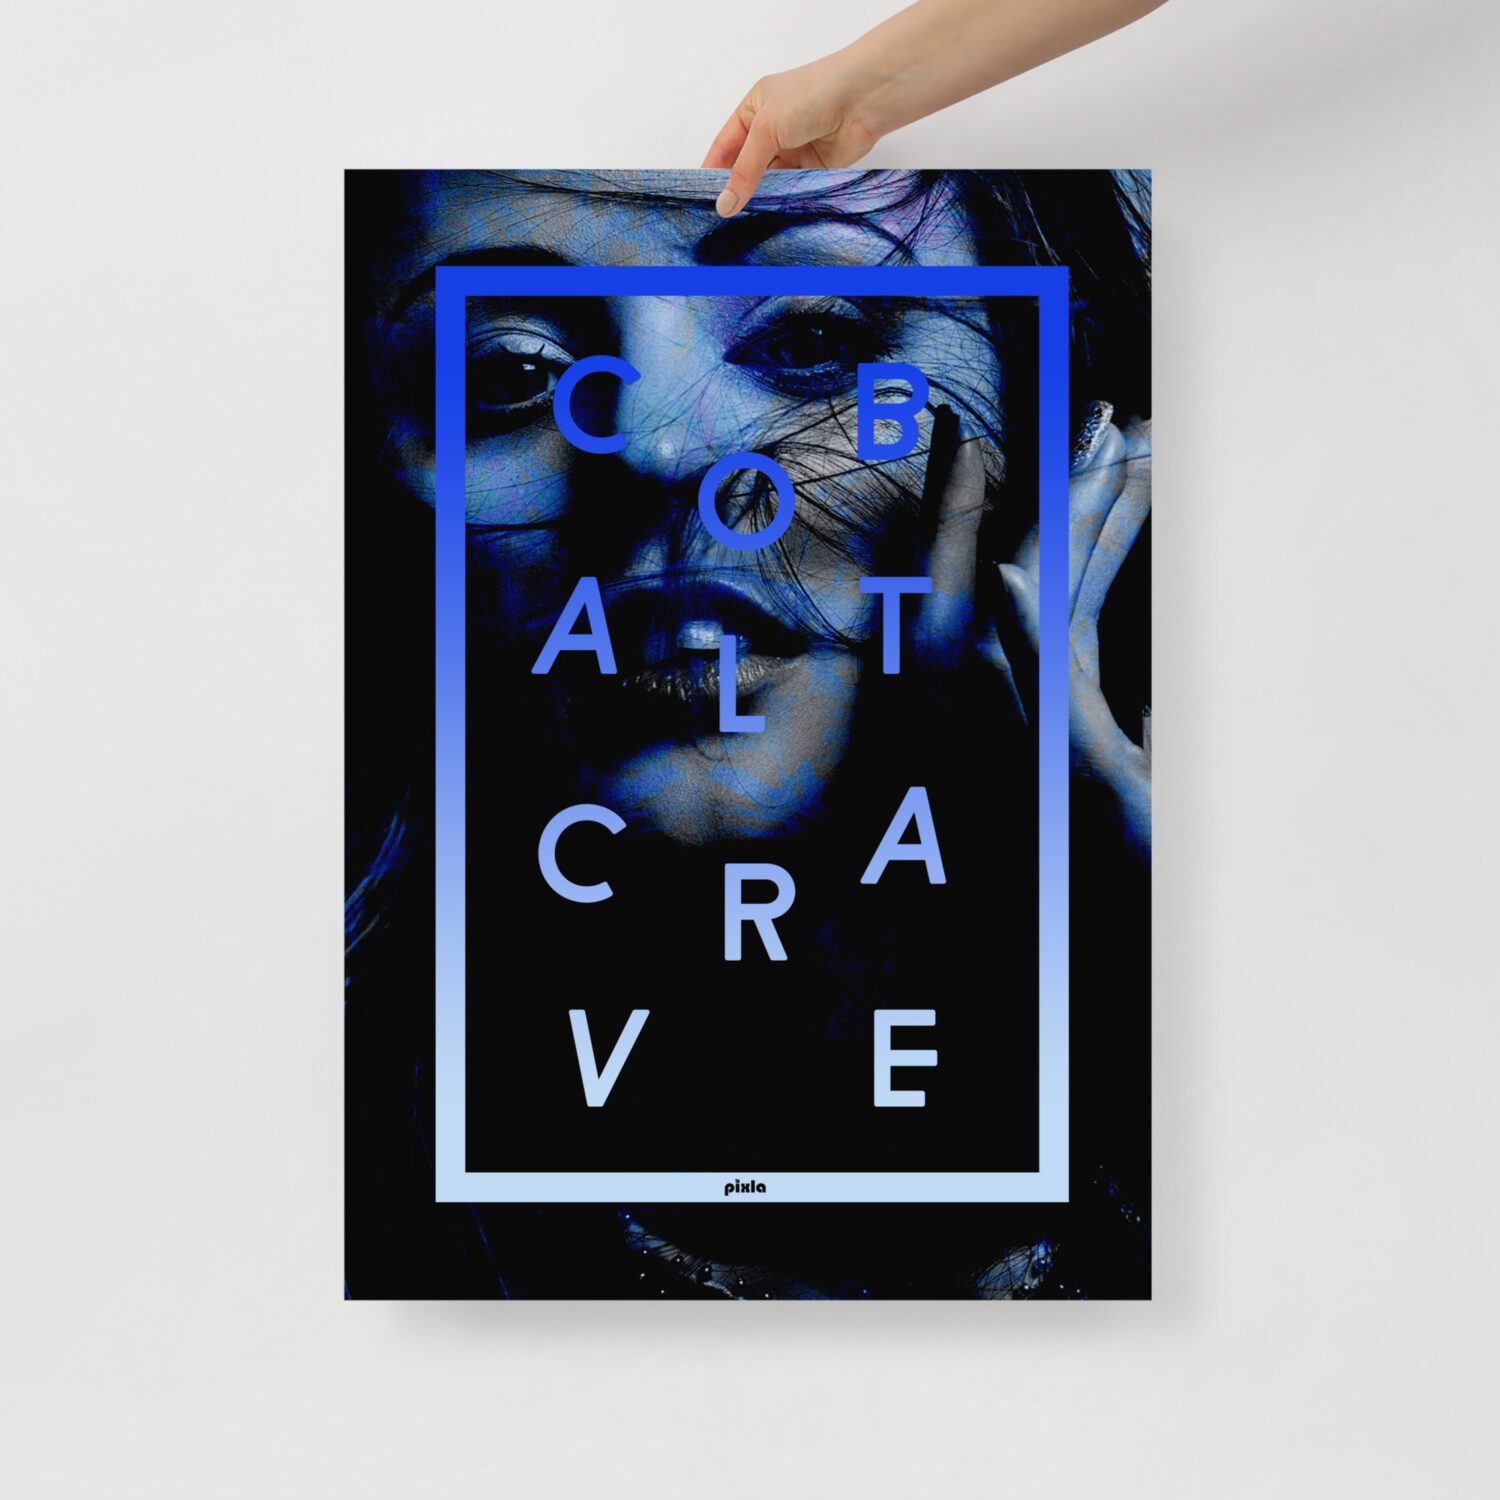 Gorgeous vibrant print with a model and cool font in cobalt blue and black design – printed on a luxurious and durable matte photo paper. Makes any room stylish!